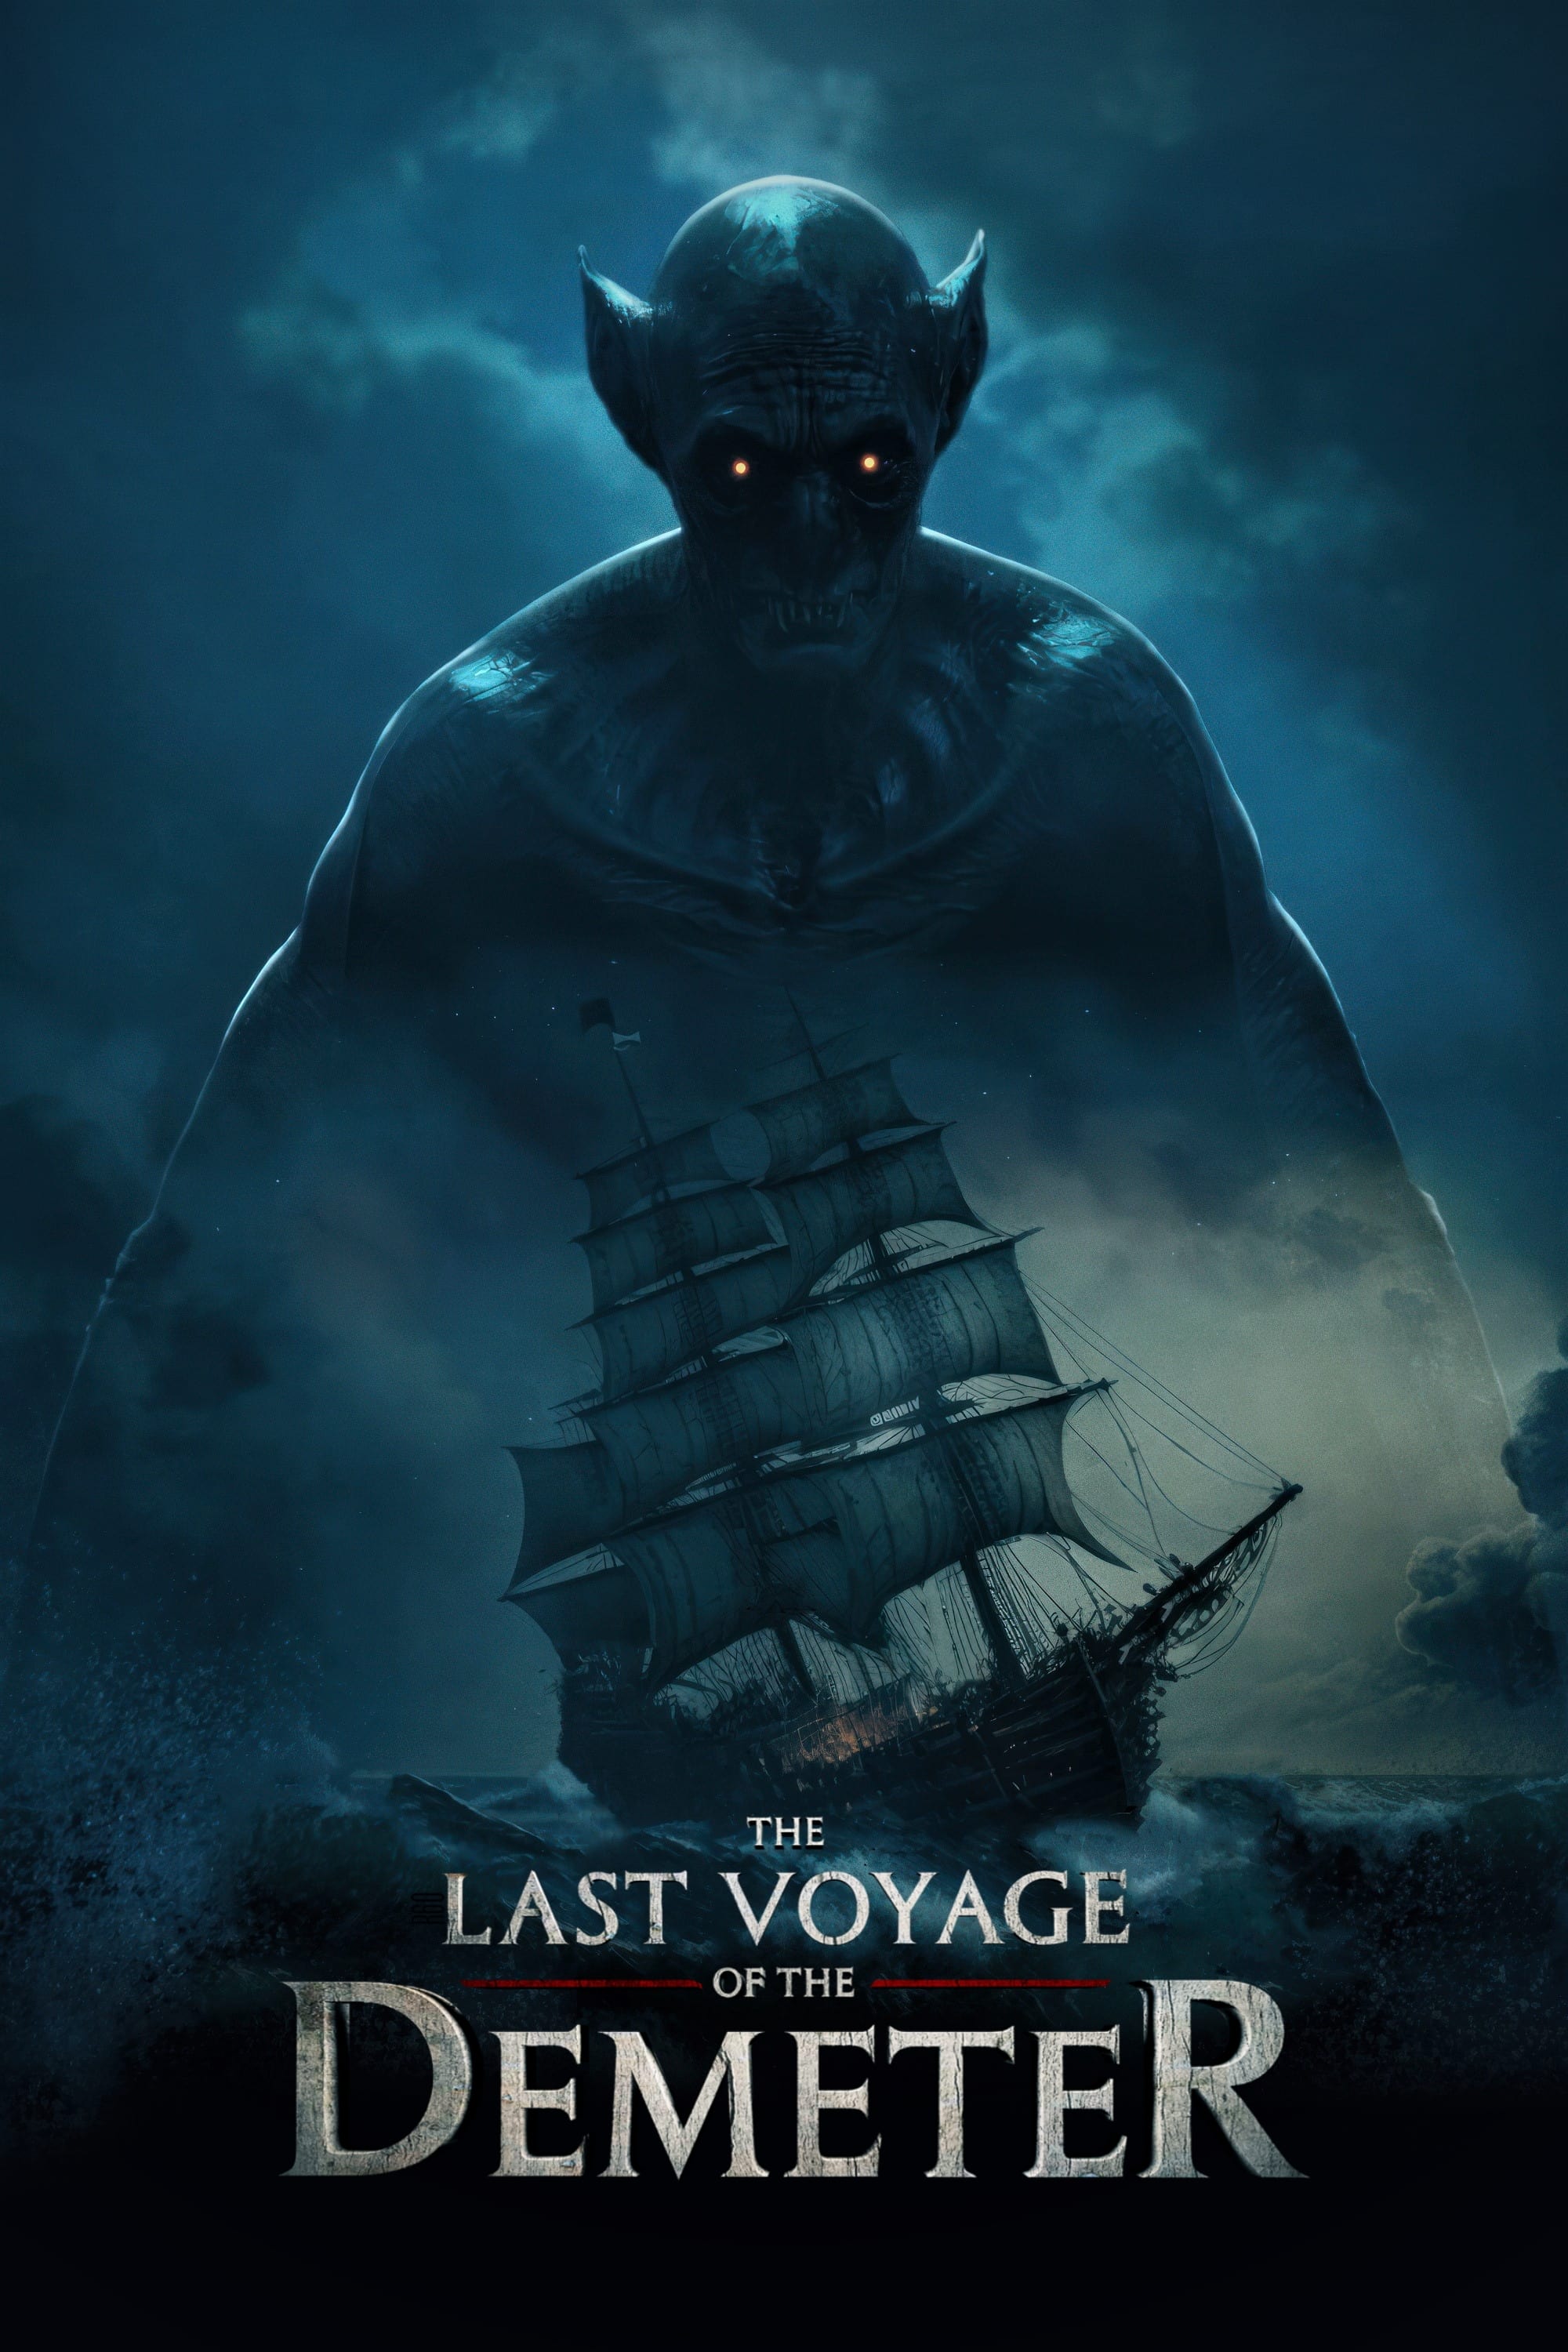 The Last Voyage of the Demeter Sequel Possibilities